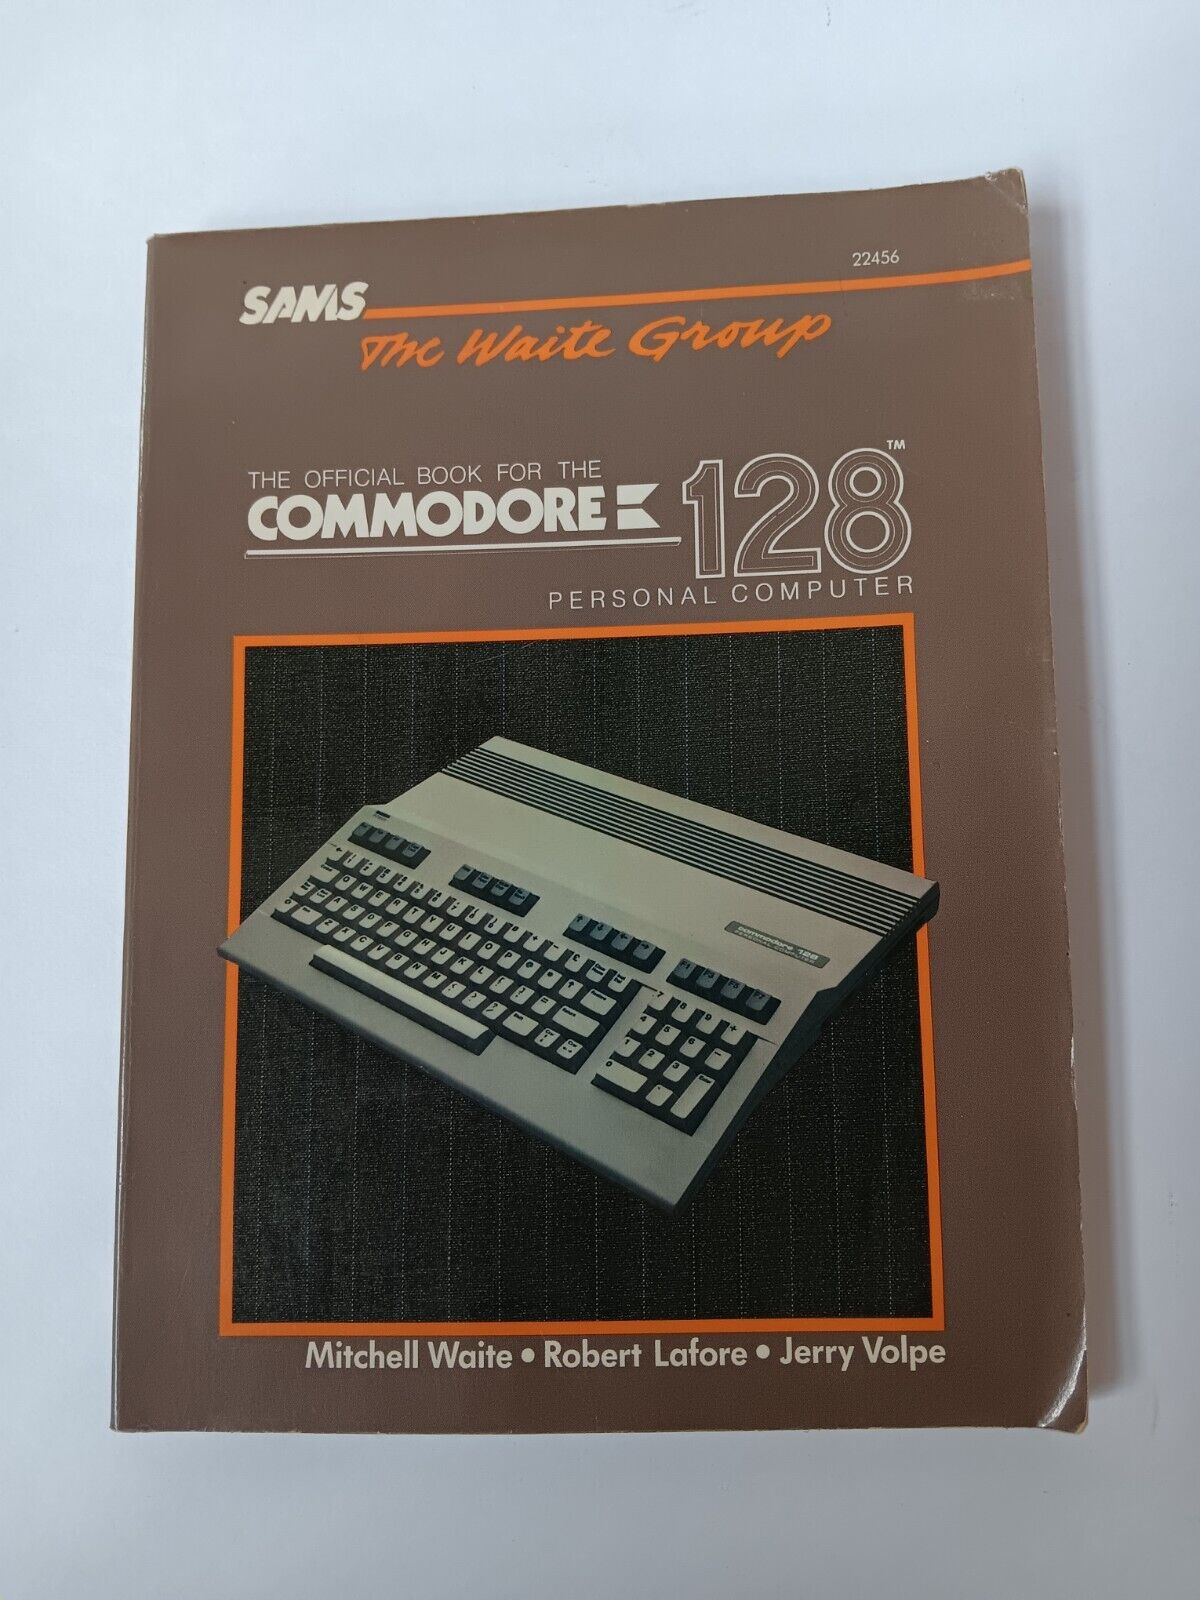 SAMS The Official Book for the Commodore 128 PC Waite Group, Lafore, Volpe